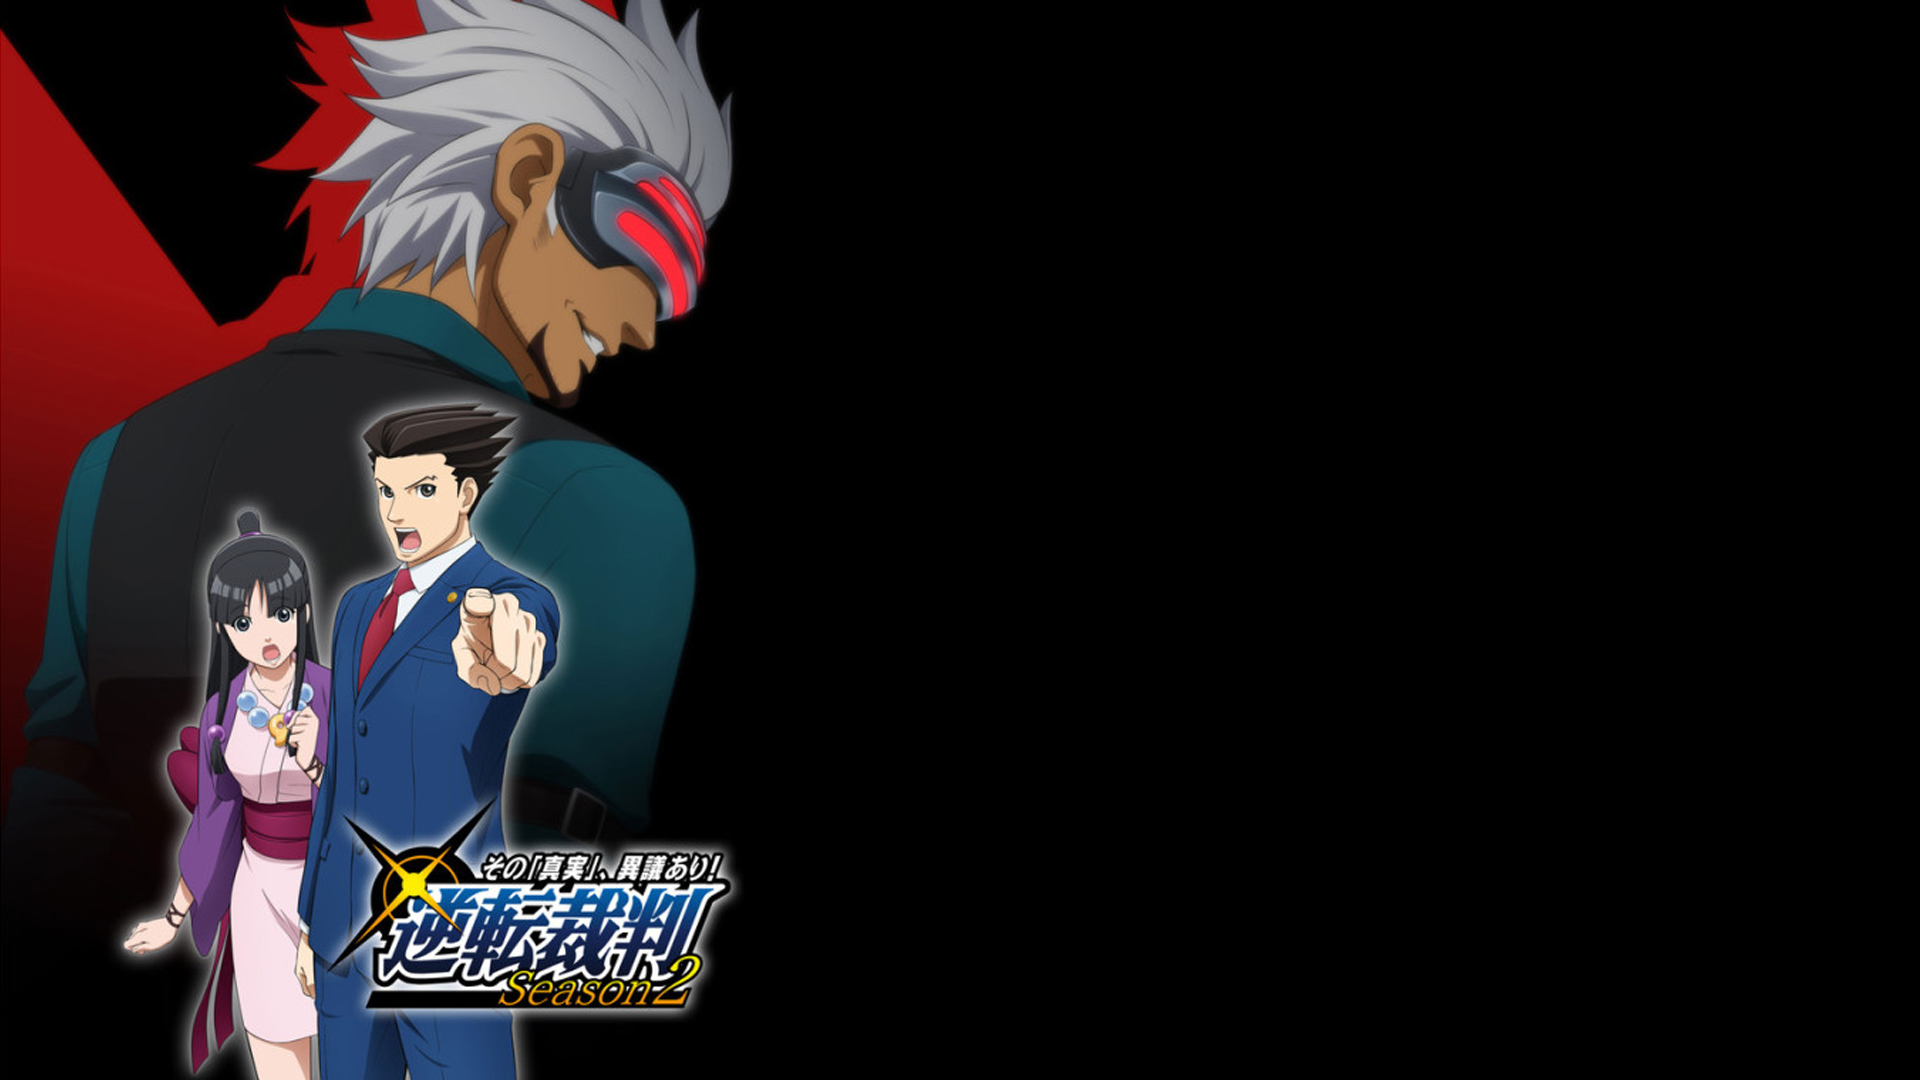 video game, phoenix wright: ace attorney, godot (ace attorney), maya fey, phoenix wright, ace attorney